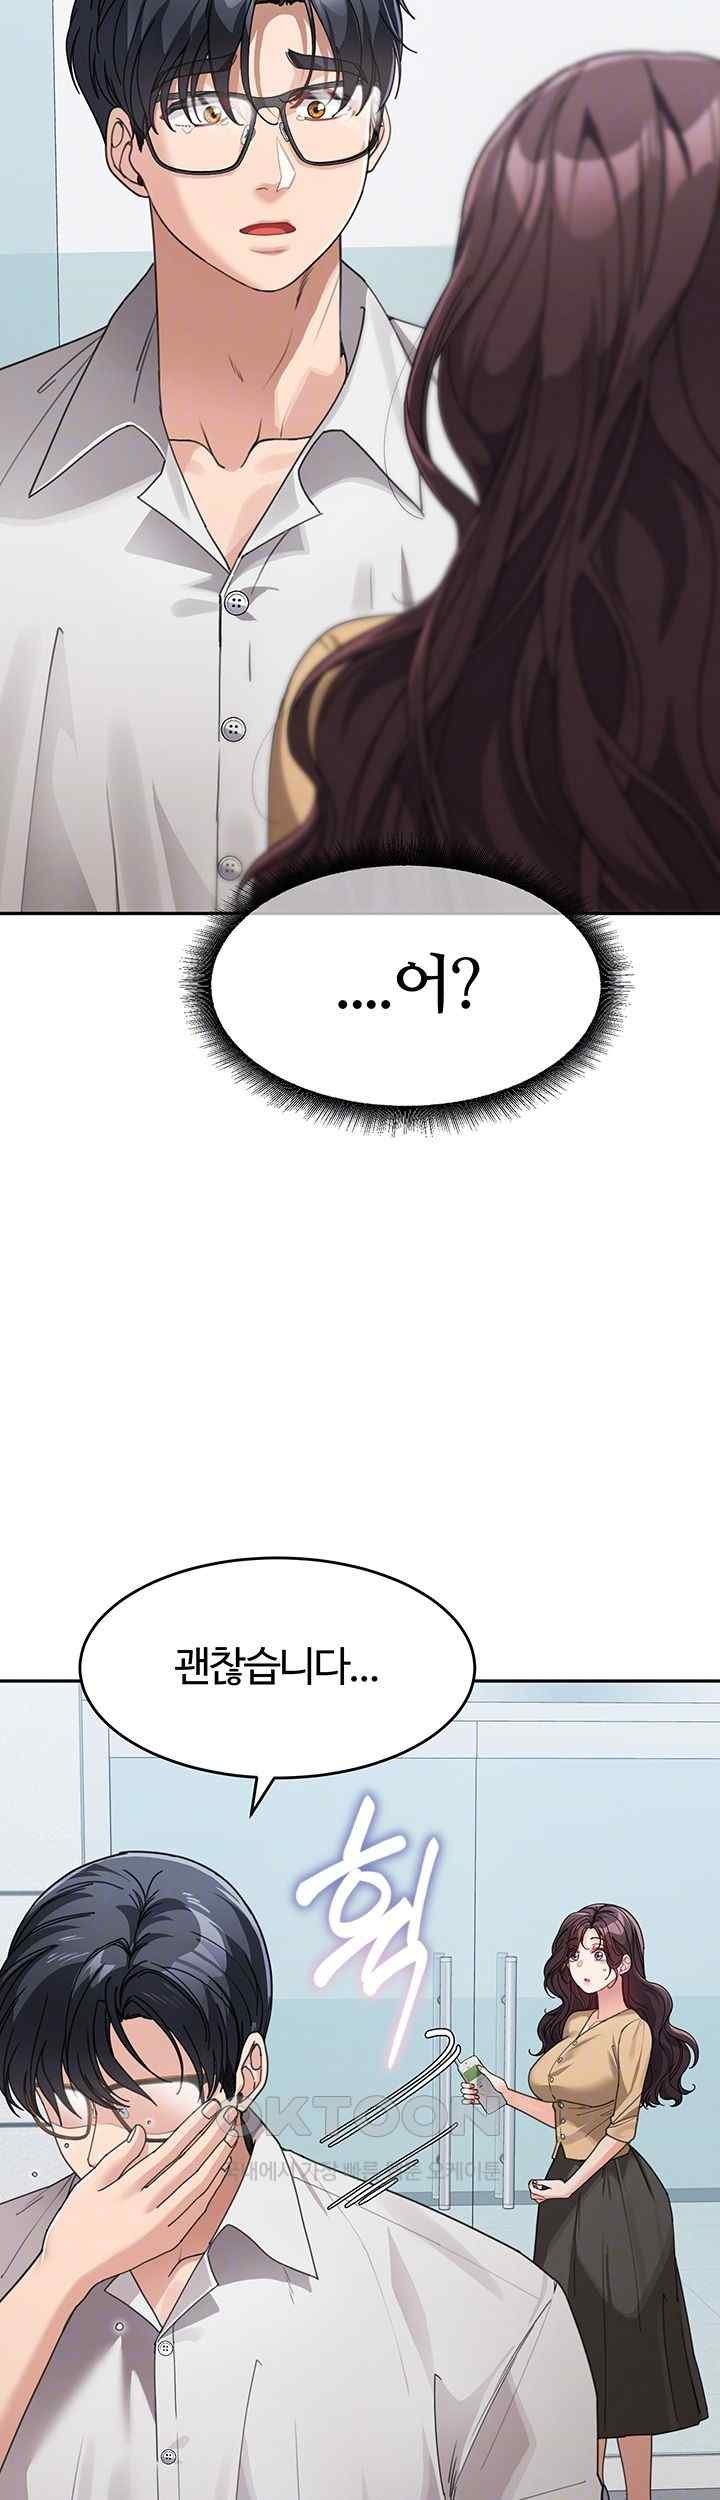 is-it-your-mother-or-sister-raw-chap-35-11